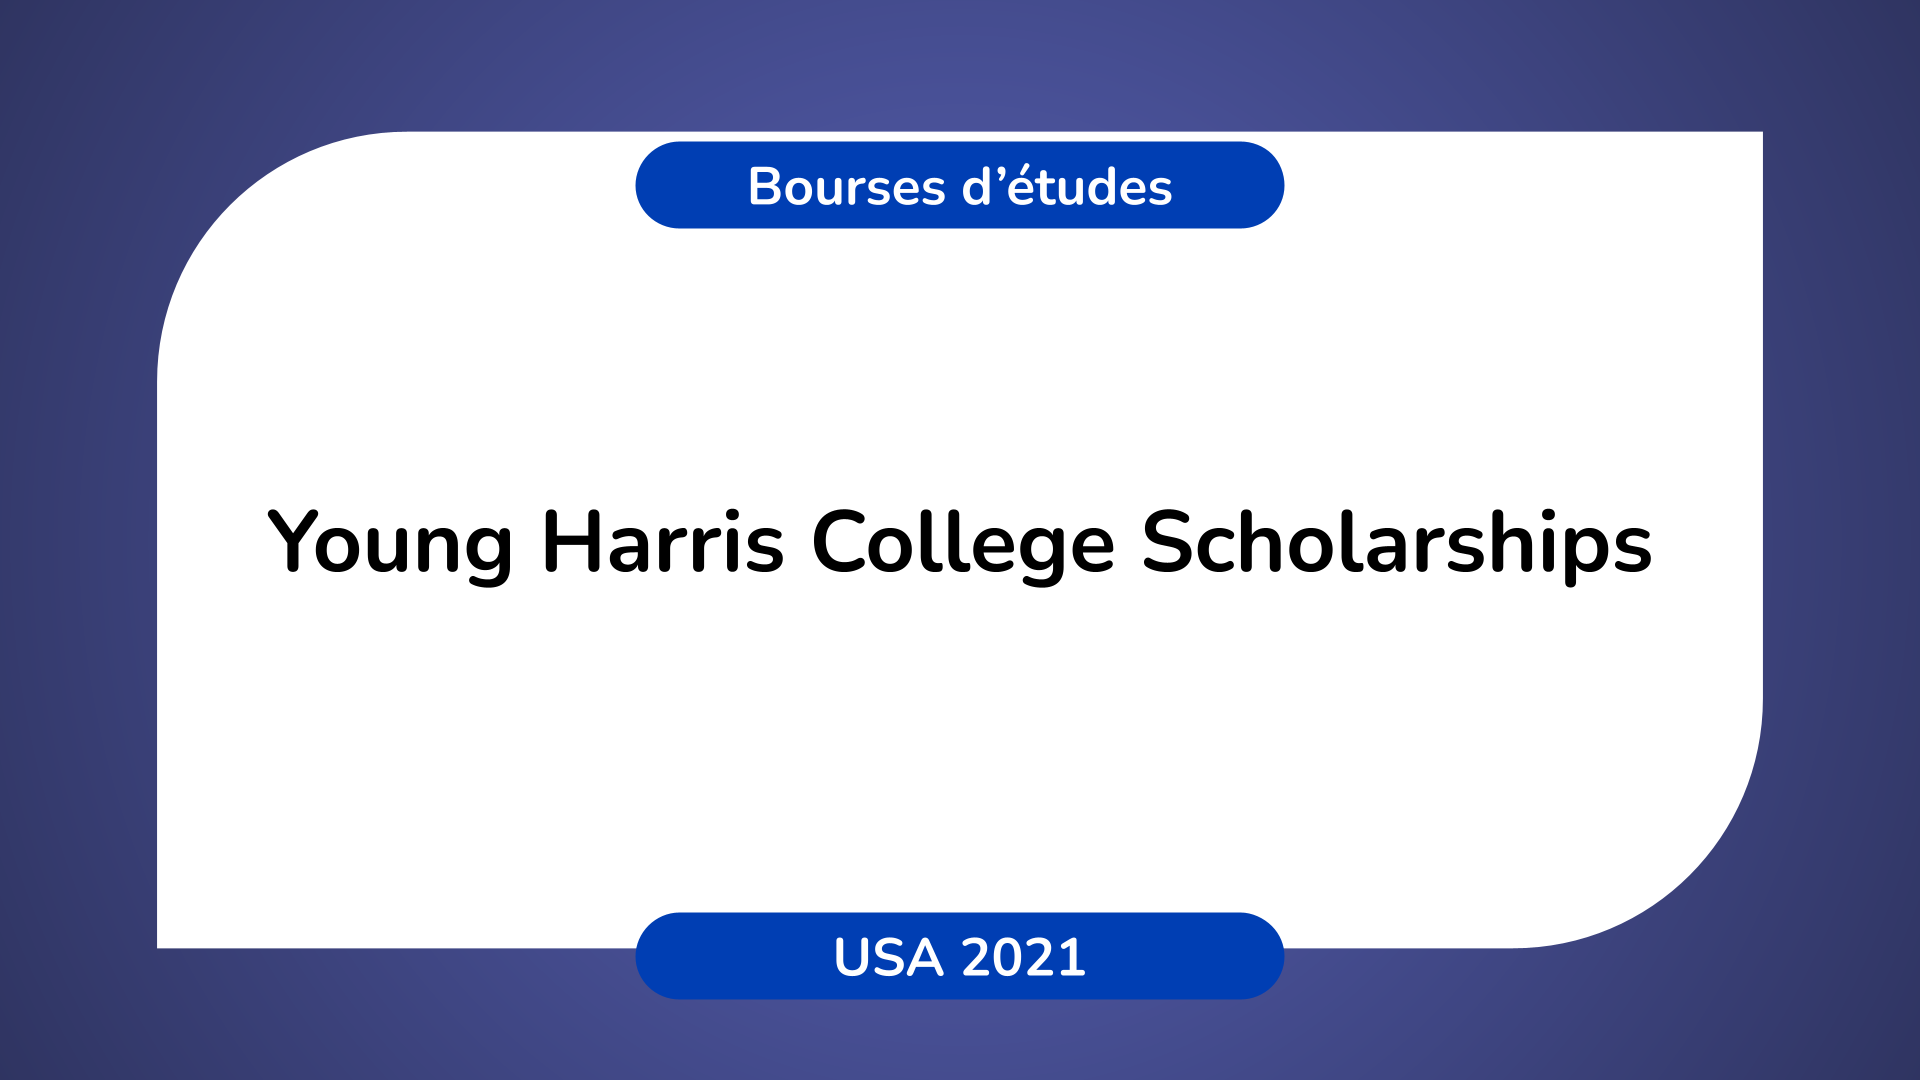 Young Harris College Scholarships in the USA in 2021